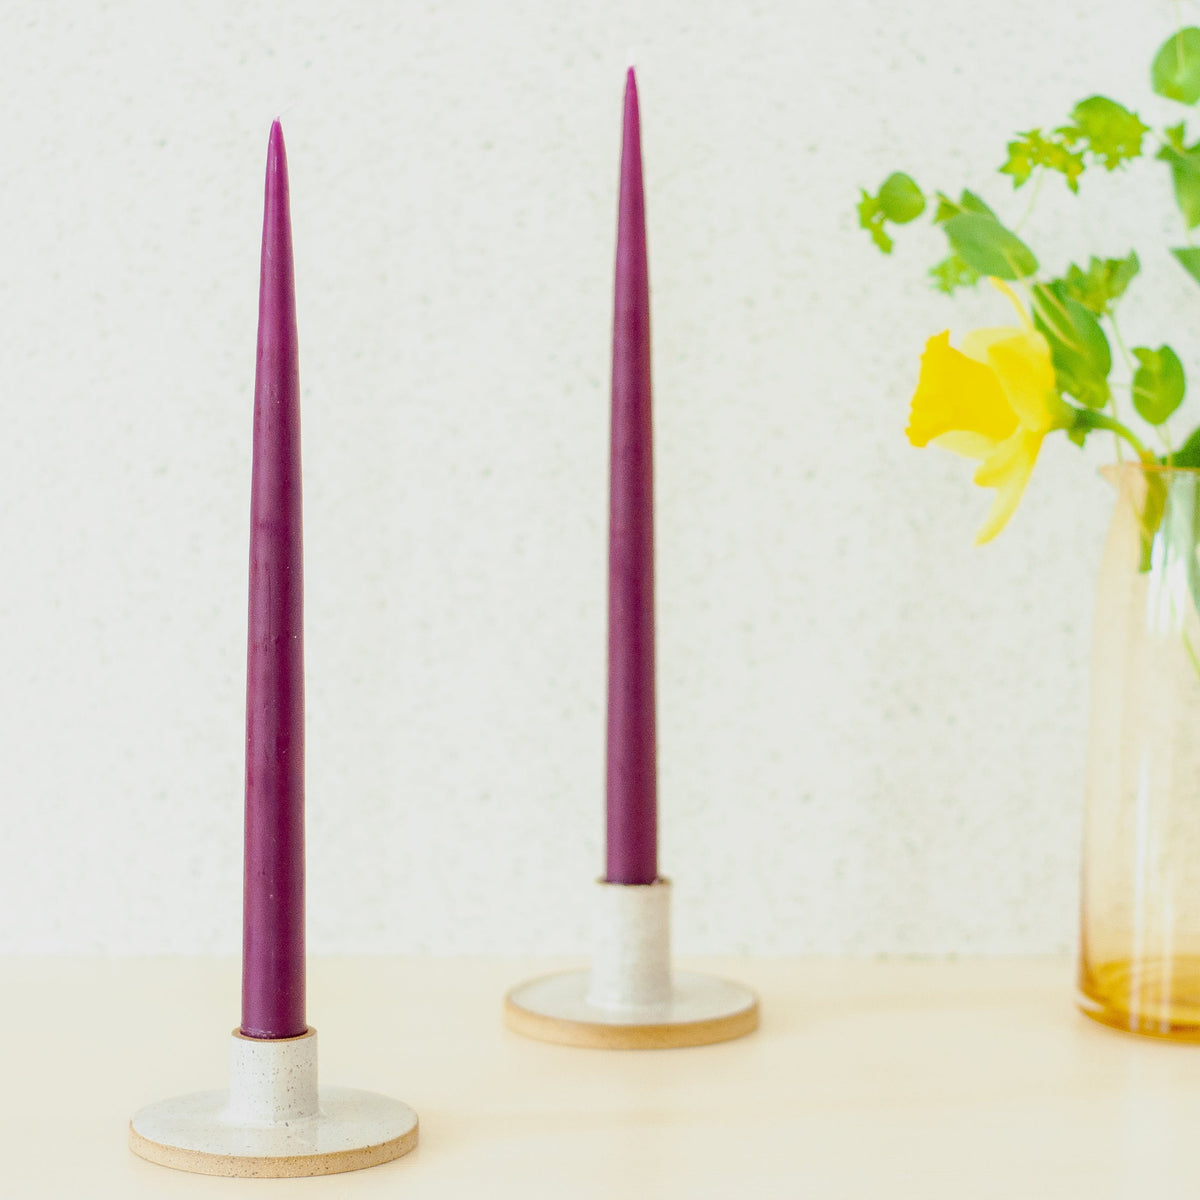 13" Dripless Taper Candles, Set of 2